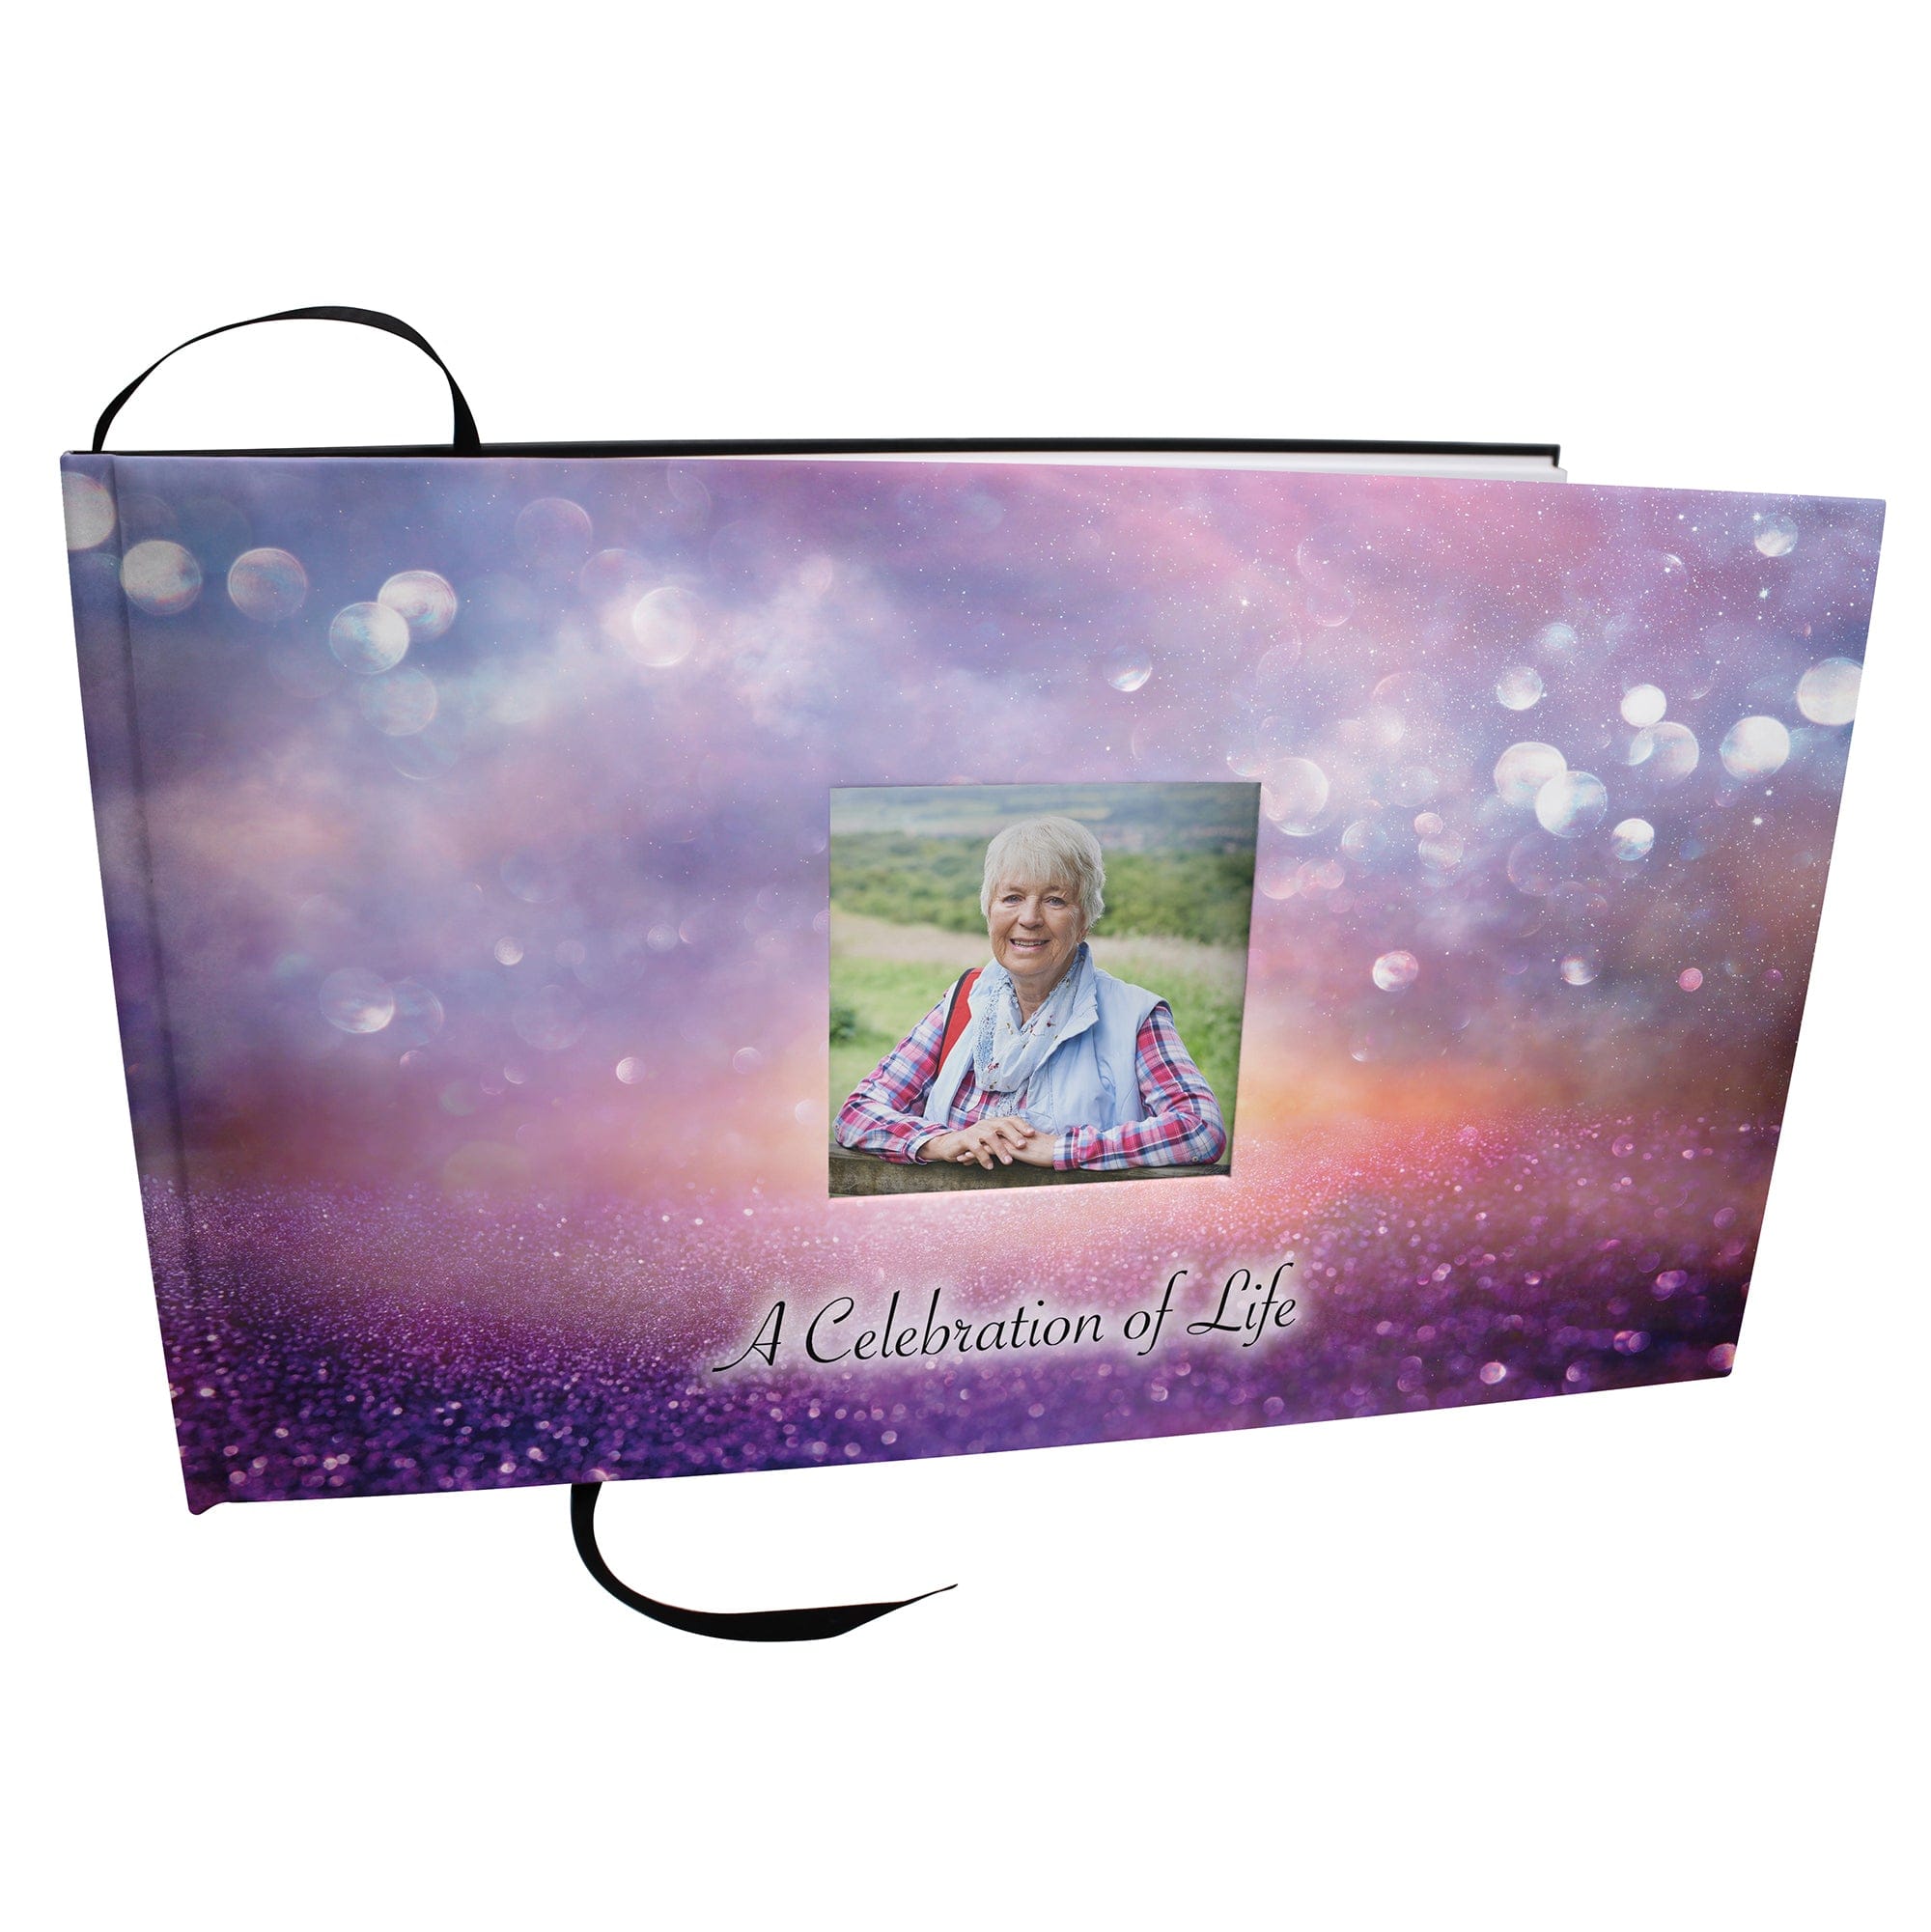 Commemorative Cremation Urns Home & Garden Guardian Angel (Purple) Matching Themed 'Celebration of Life' Guest Book for Funeral or Memorial Service